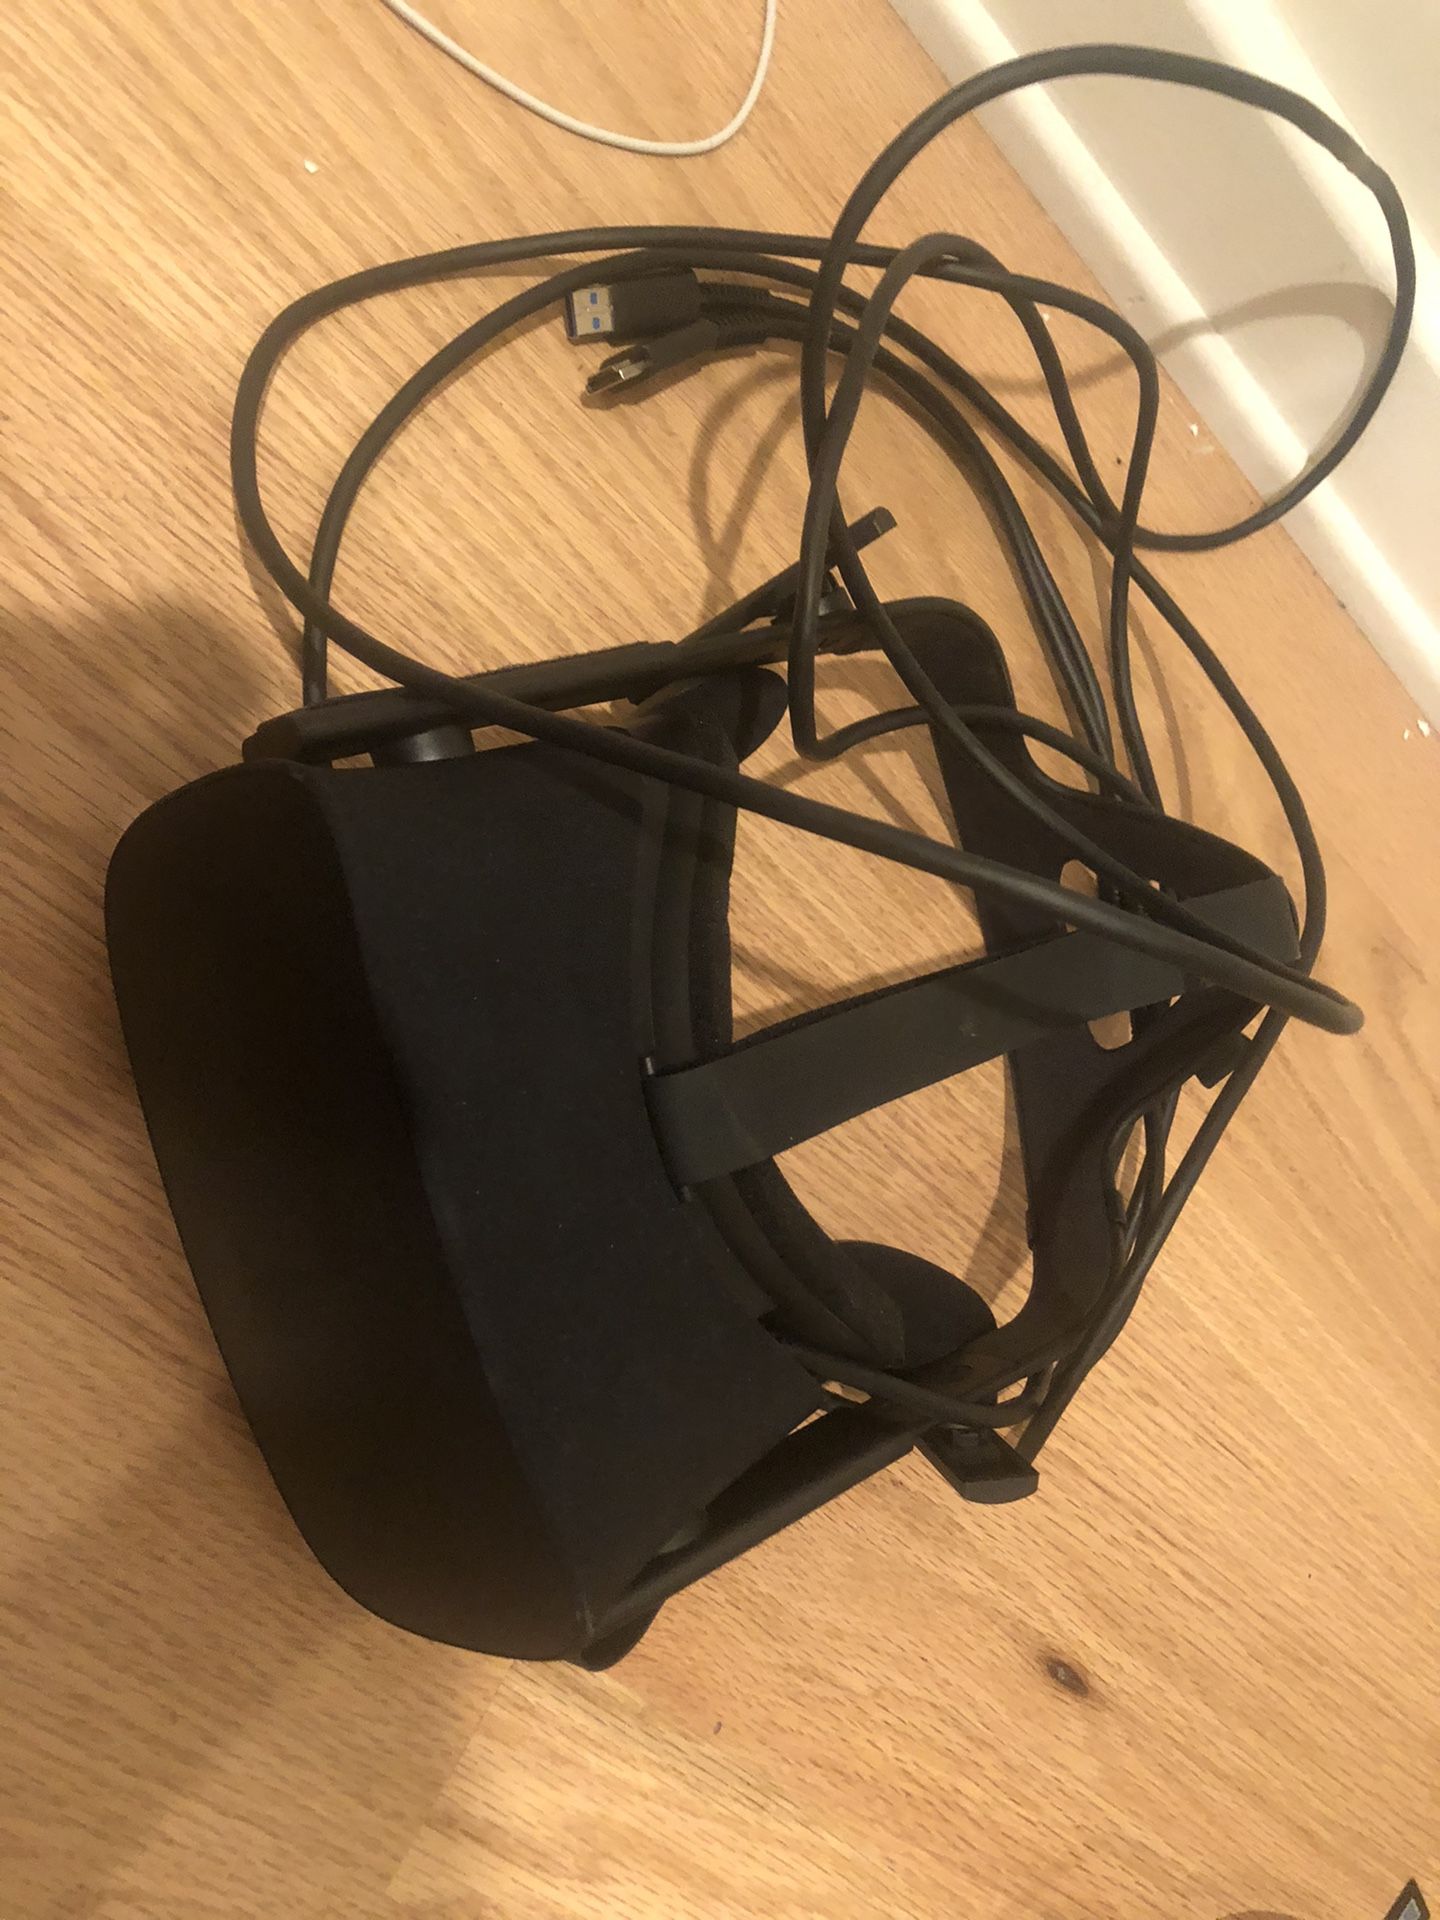 Oculus rift VR headset GREAT CONDITION